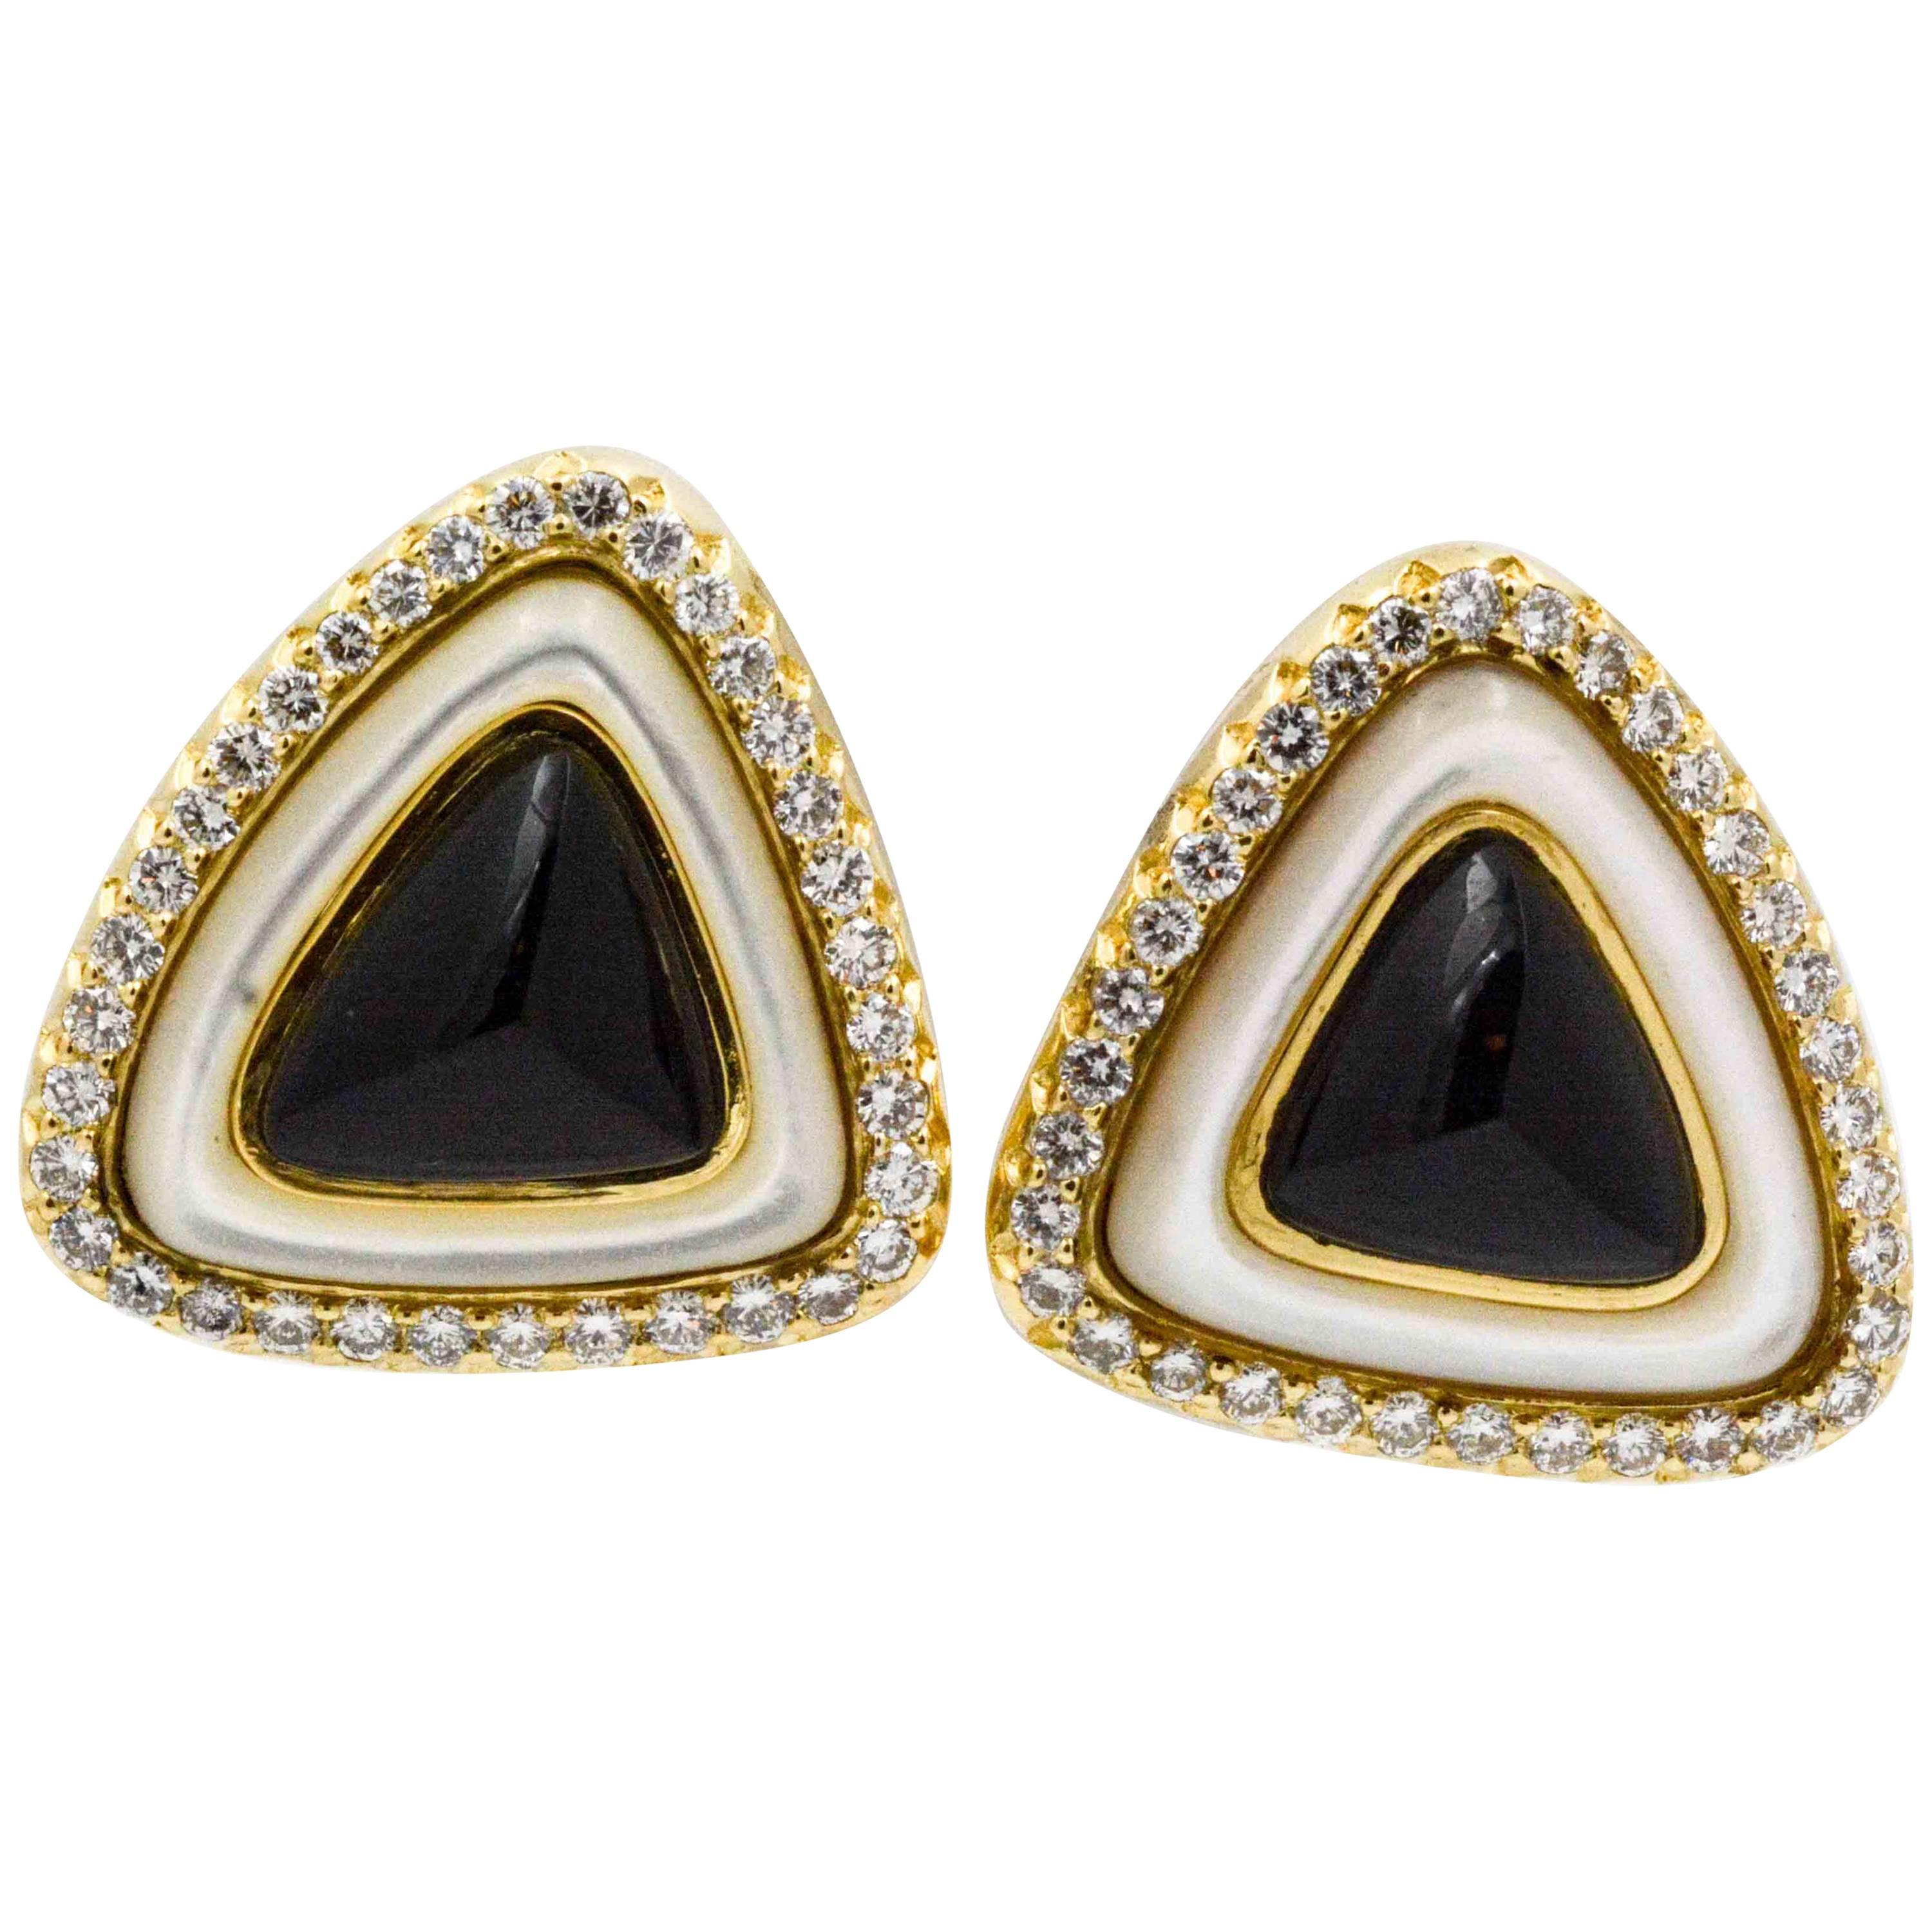 Timeless triangle cabochon cut black onyx meets crisp white Mother-of-Pearl which are surrounded by 70 dazzling round brilliant cut diamonds set in 18 karat yellow gold earrings. These exquisite earrings are stamped 